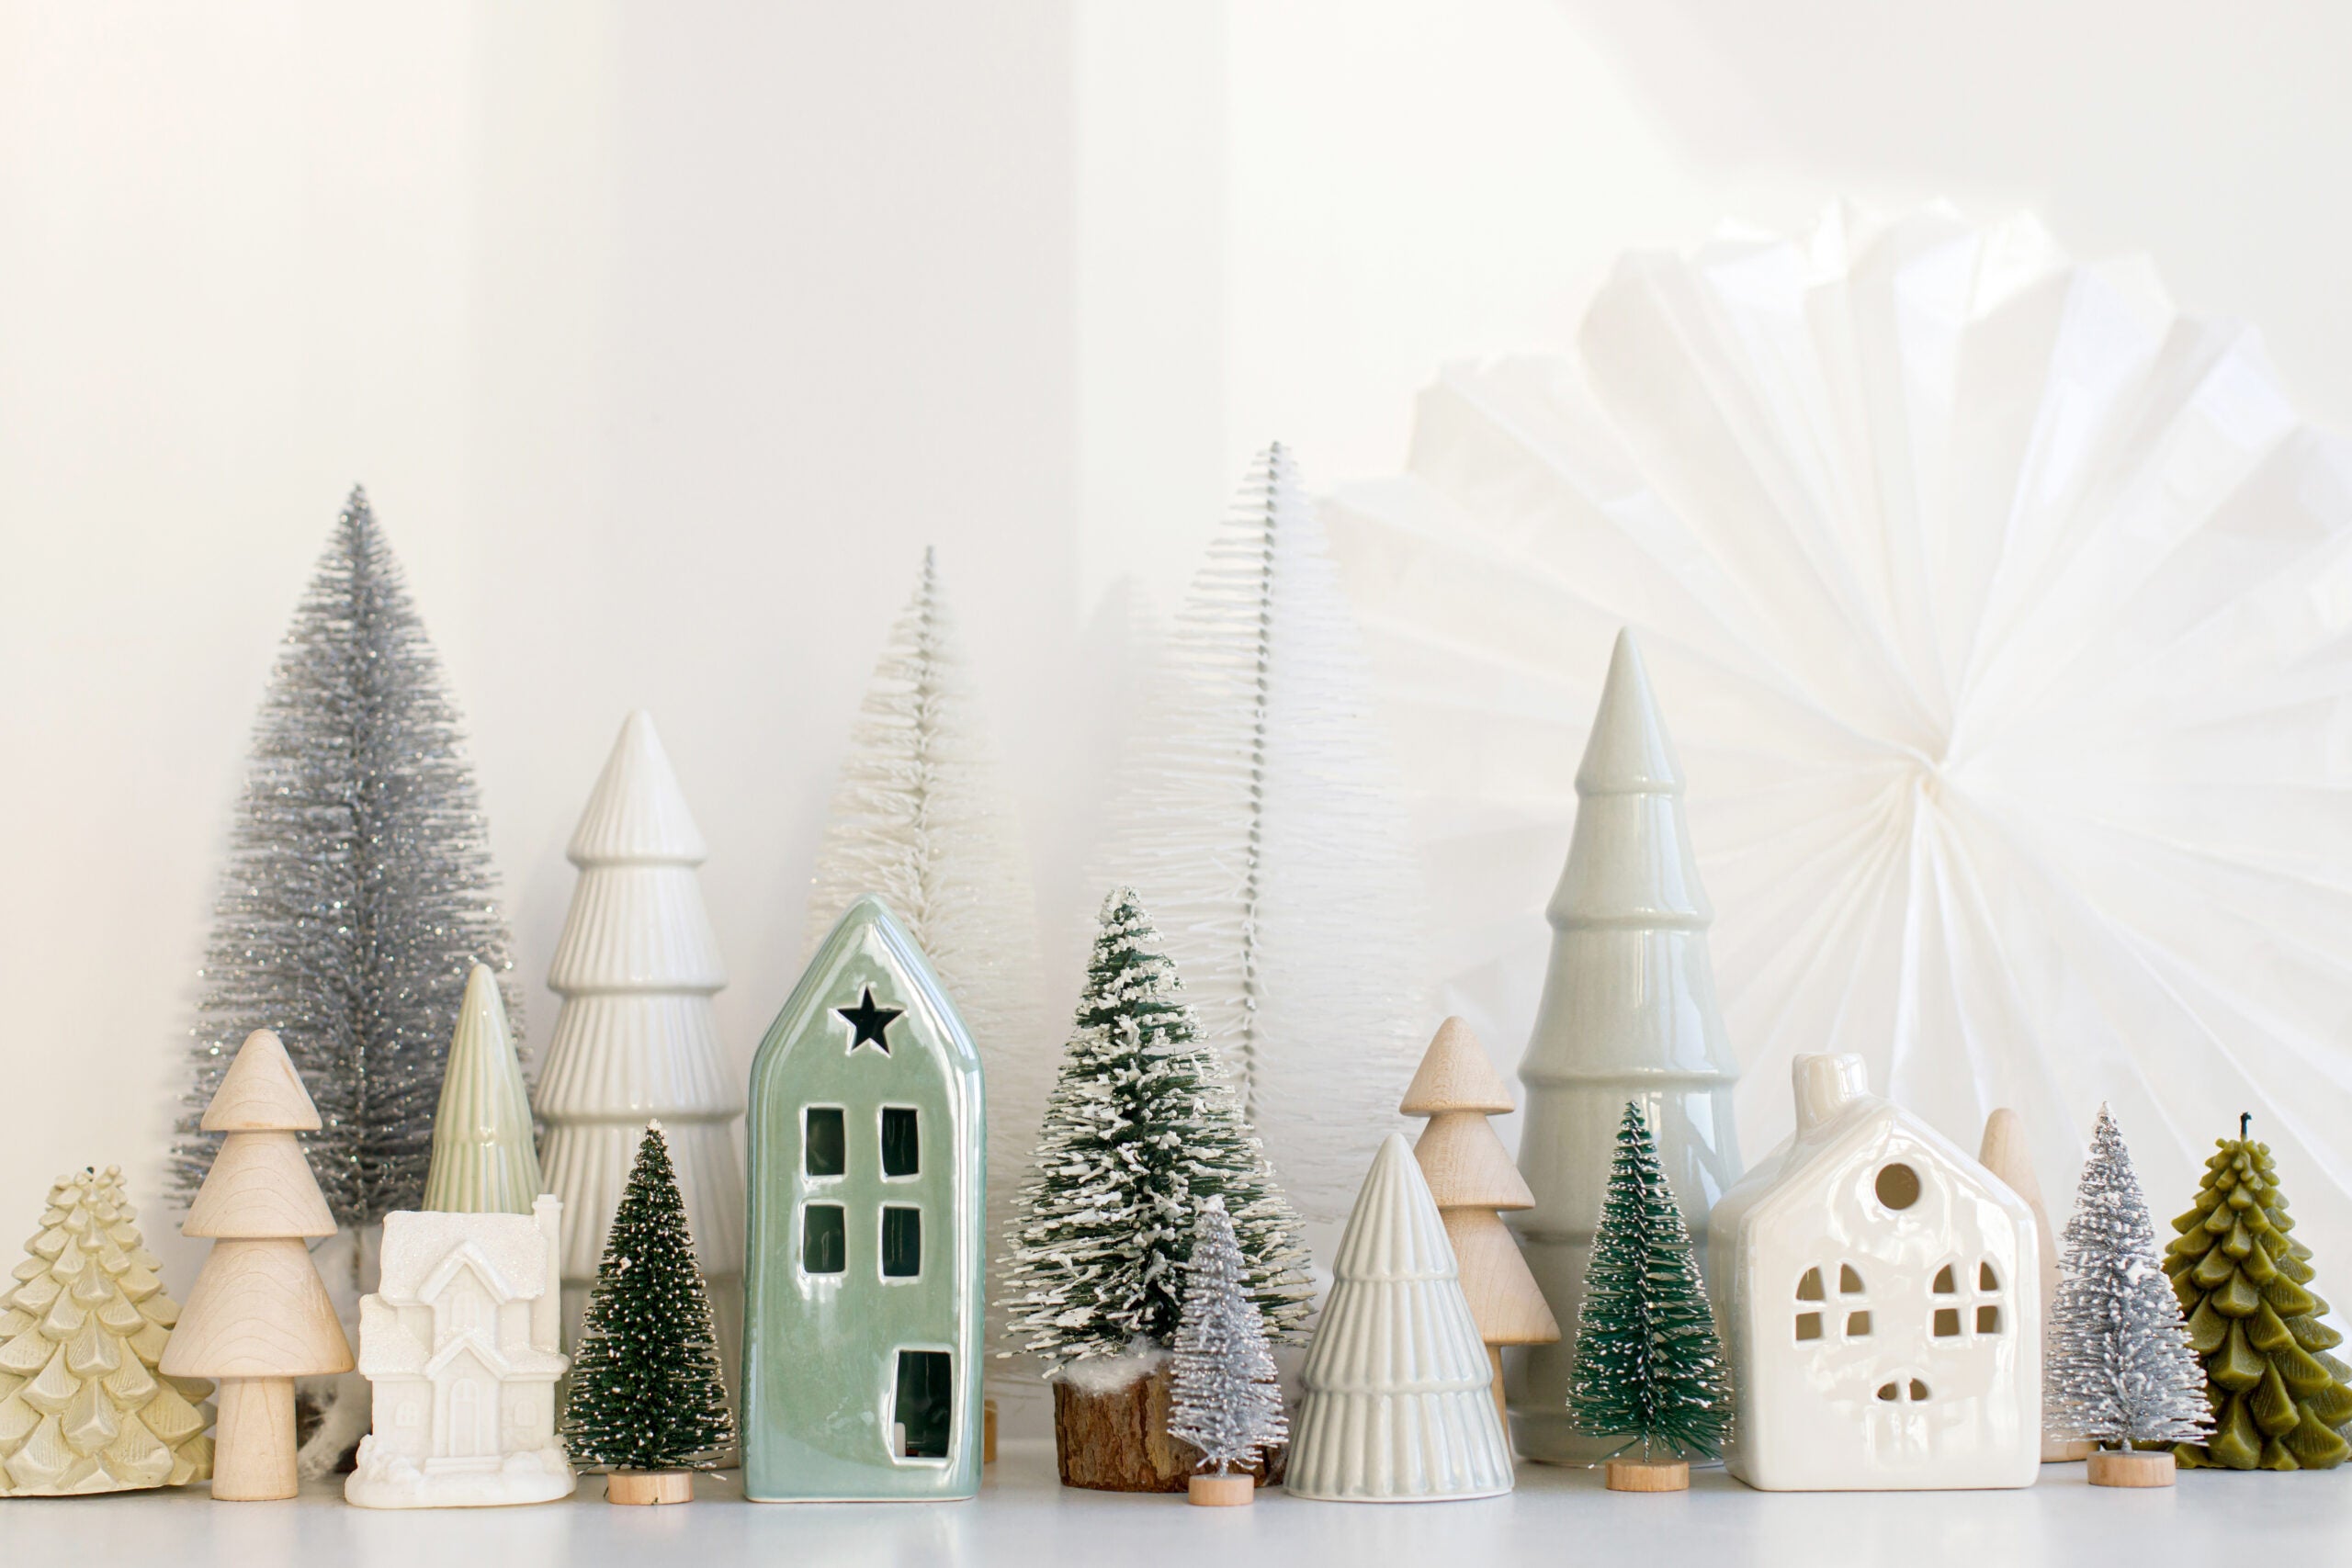 Modern christmas scene, miniature snowy village on white table. Merry Christmas! Stylish little Christmas trees and house decoration. Winter holiday banner, scandinavian monochromatic decor